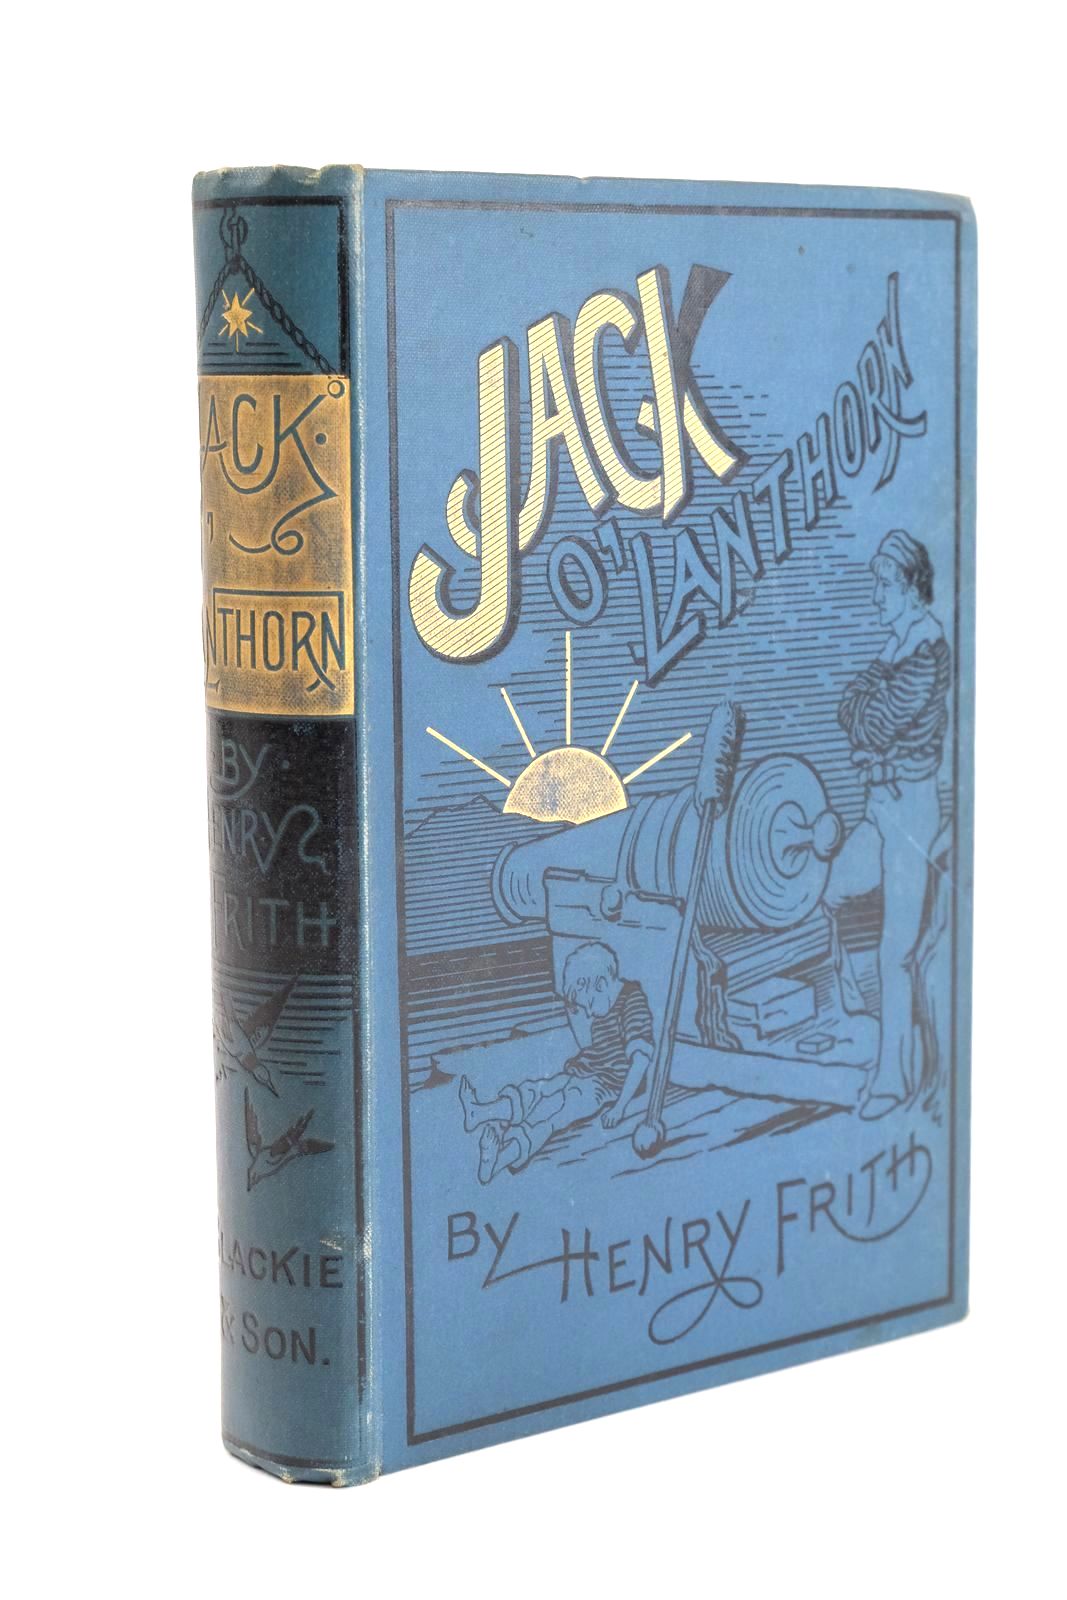 Photo of JACK O'LANTHORN written by Frith, Henry illustrated by Feller, Frank published by Blackie &amp; Son (STOCK CODE: 1324430)  for sale by Stella & Rose's Books